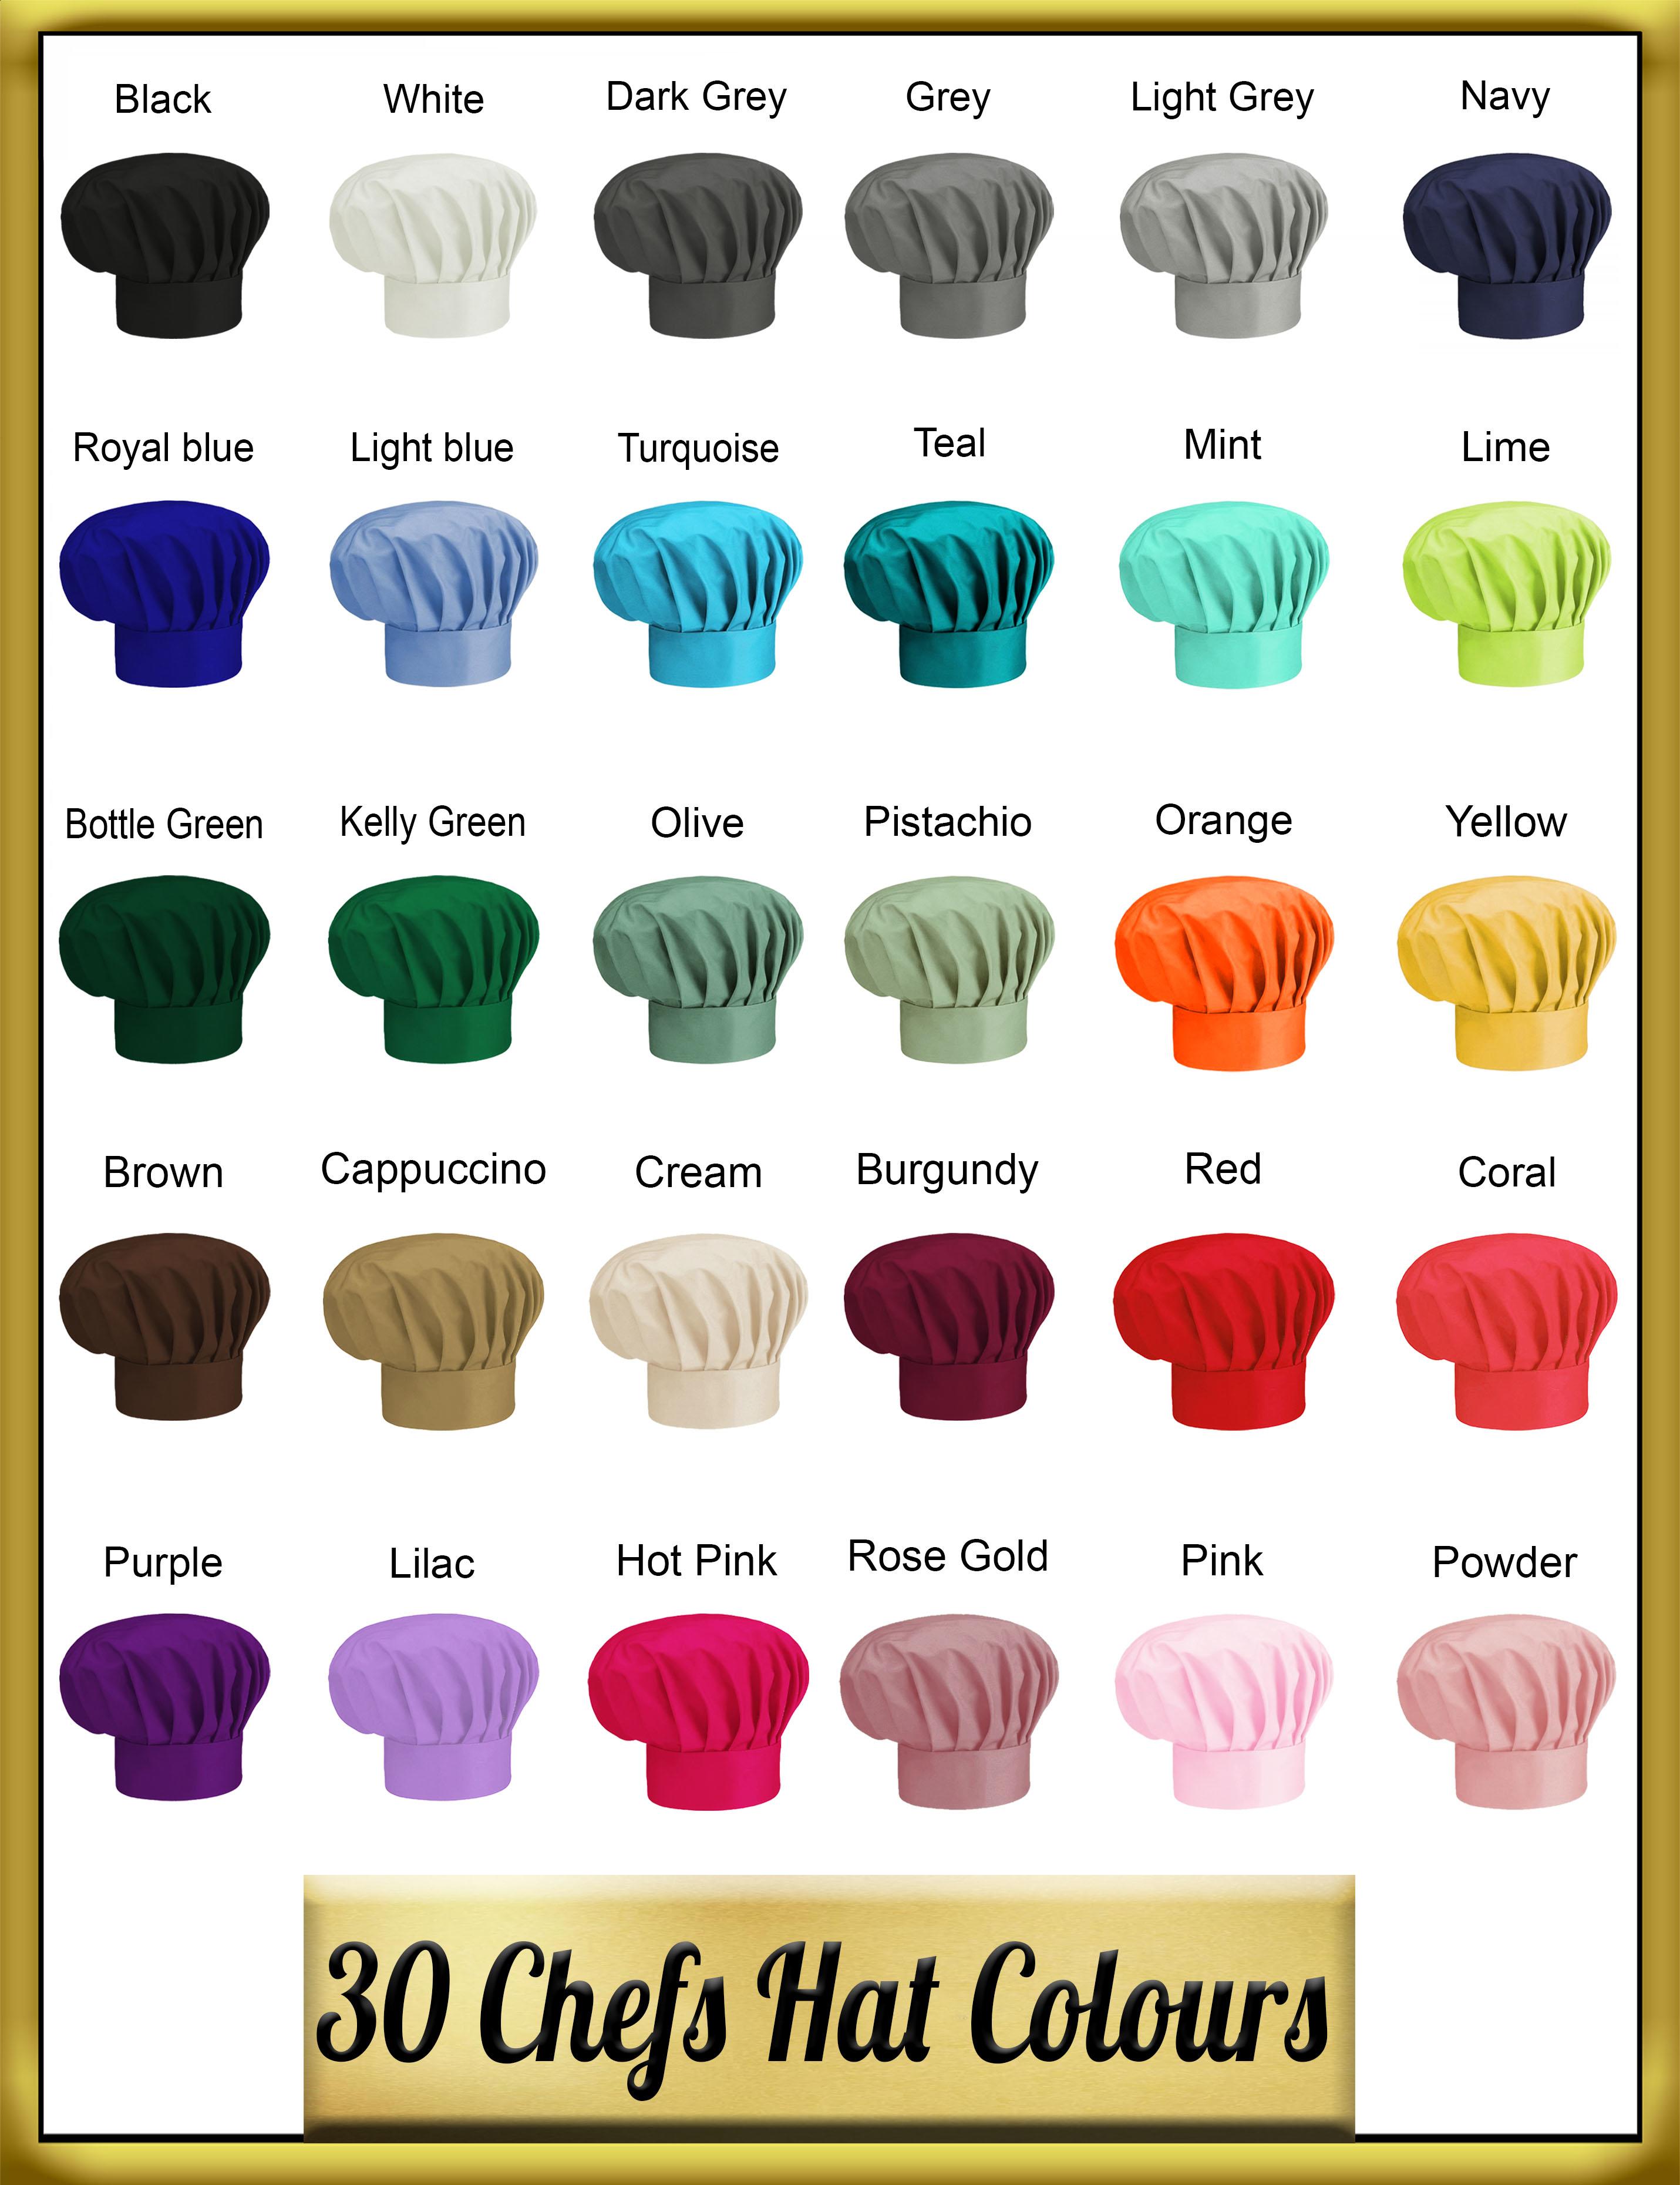 Pizza Chef's hat printed colours